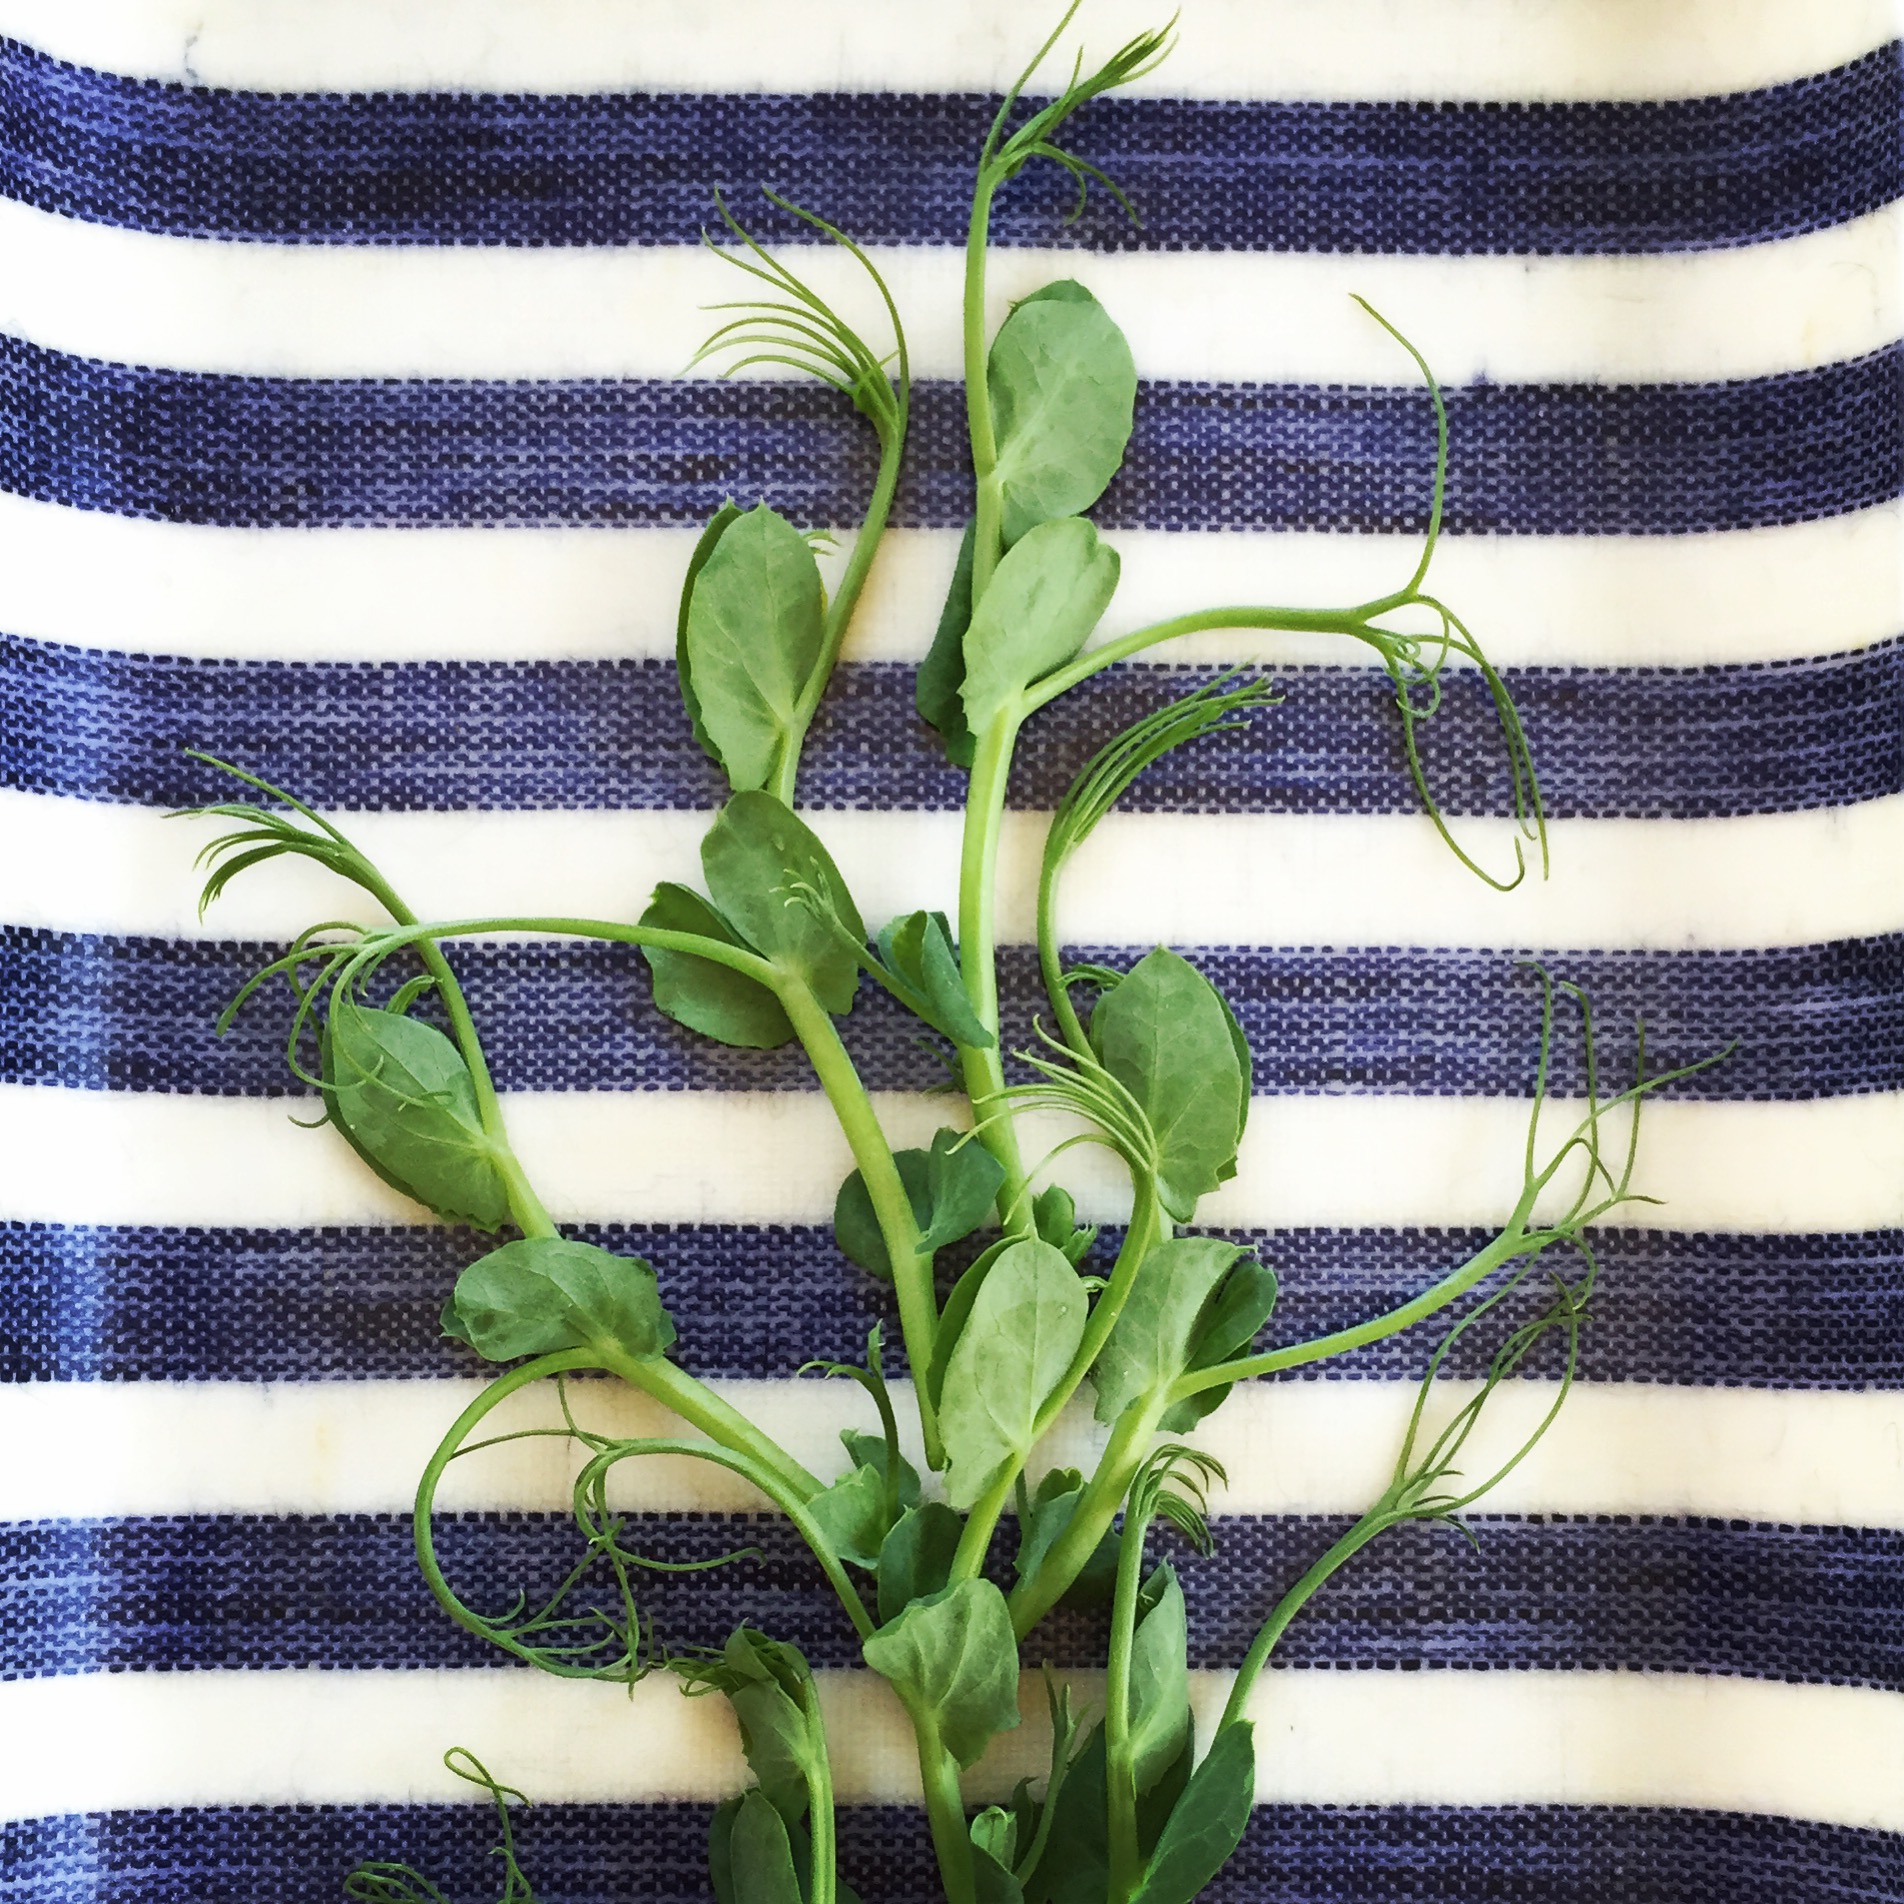  The first harvest of the year Pea shoots, they are so sweet! 